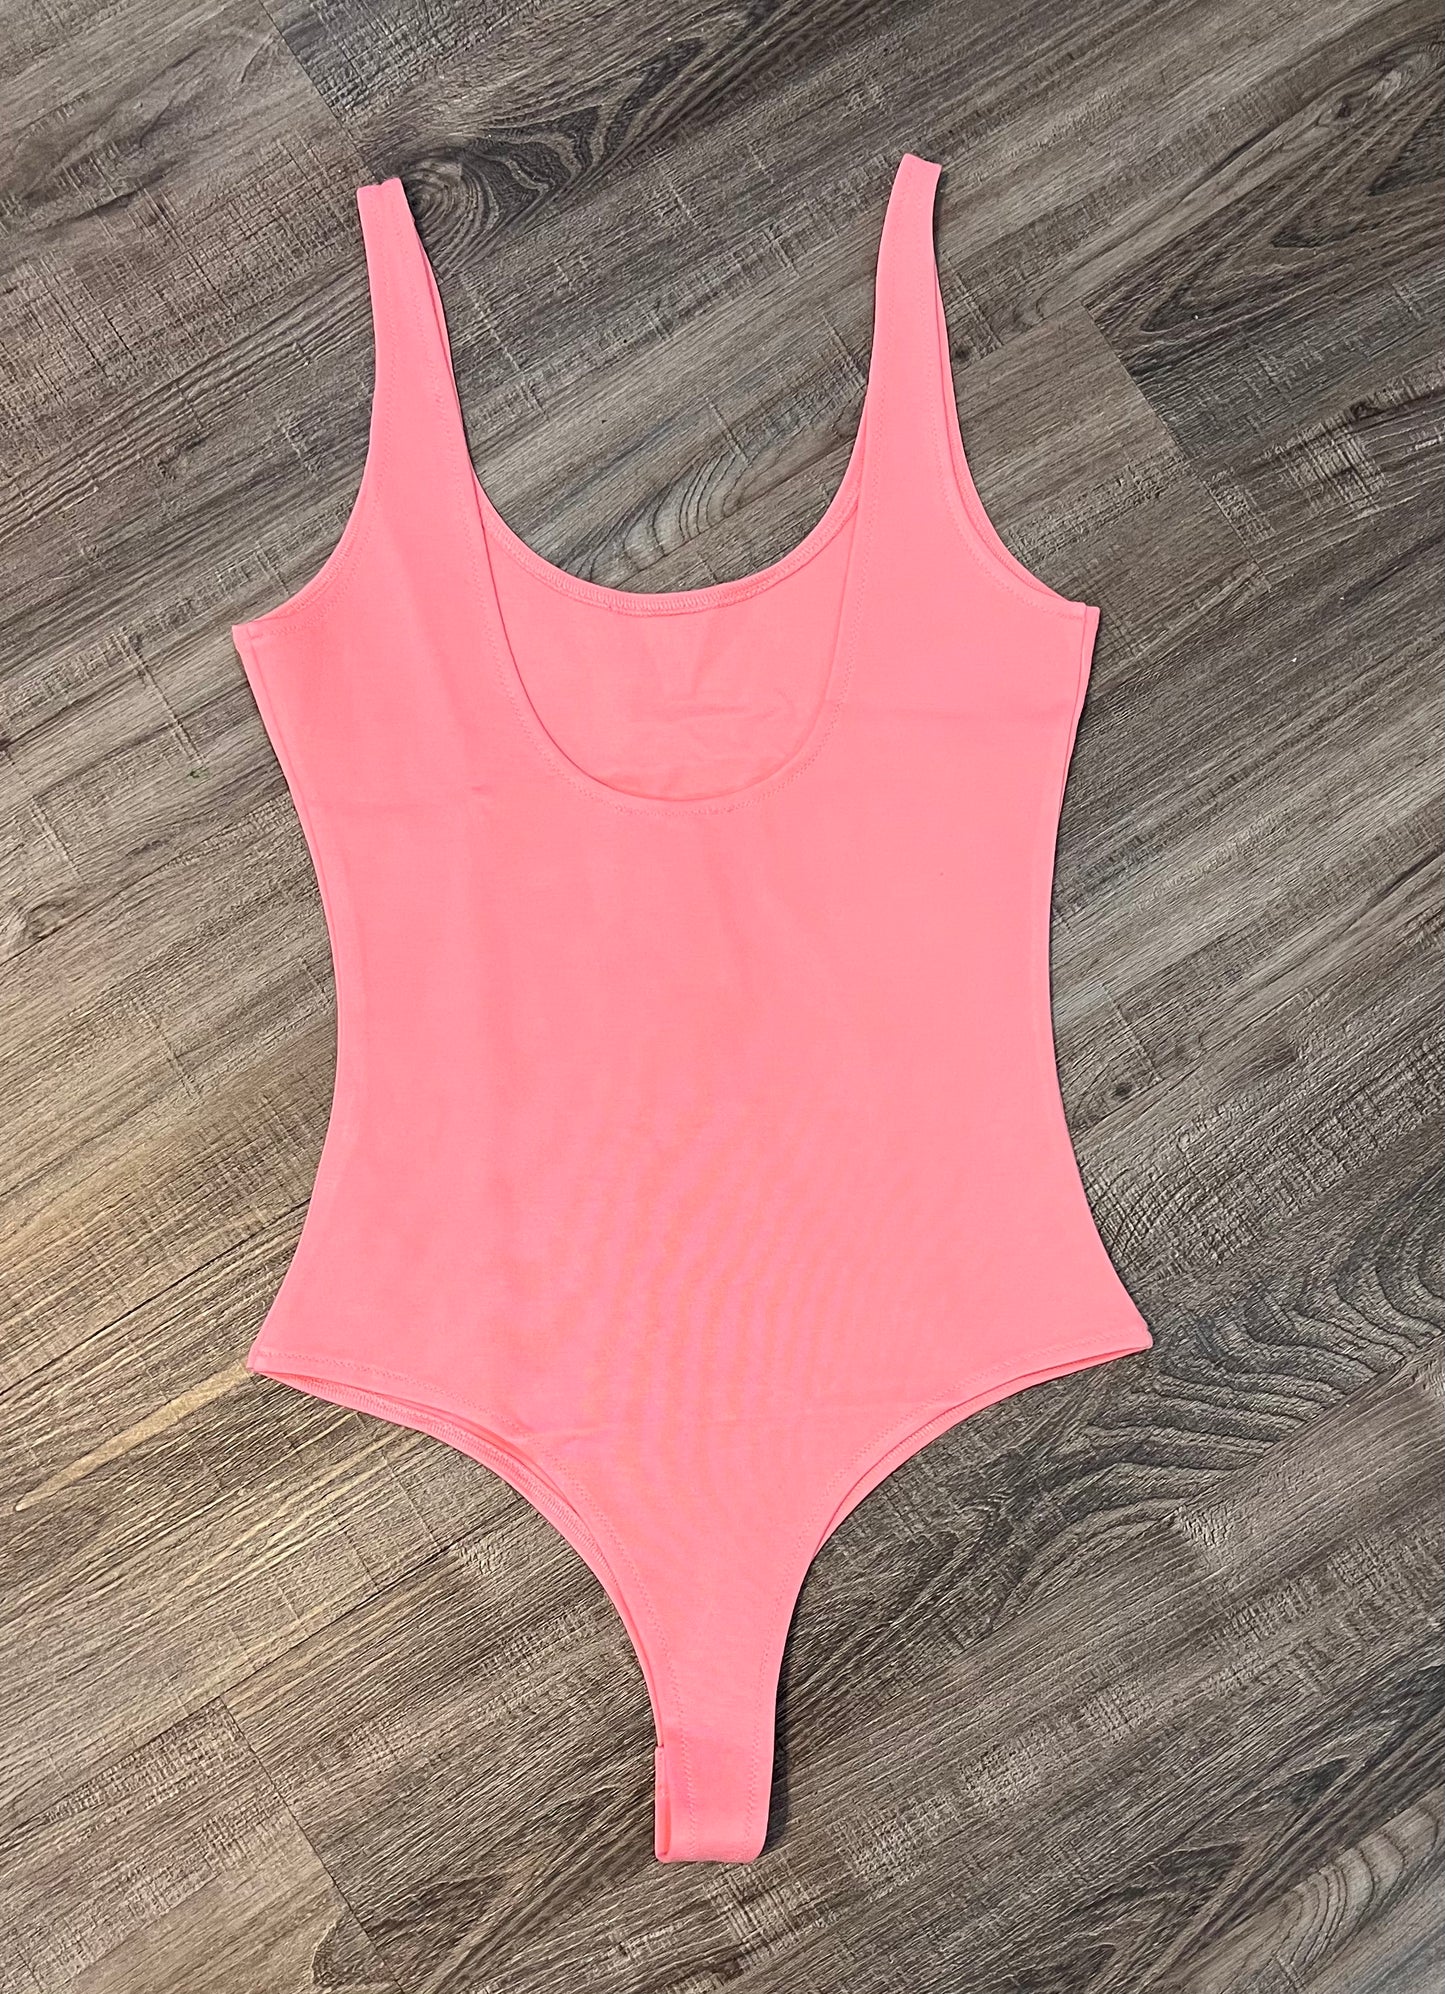 THE DOLLY PINK BODYSUIT